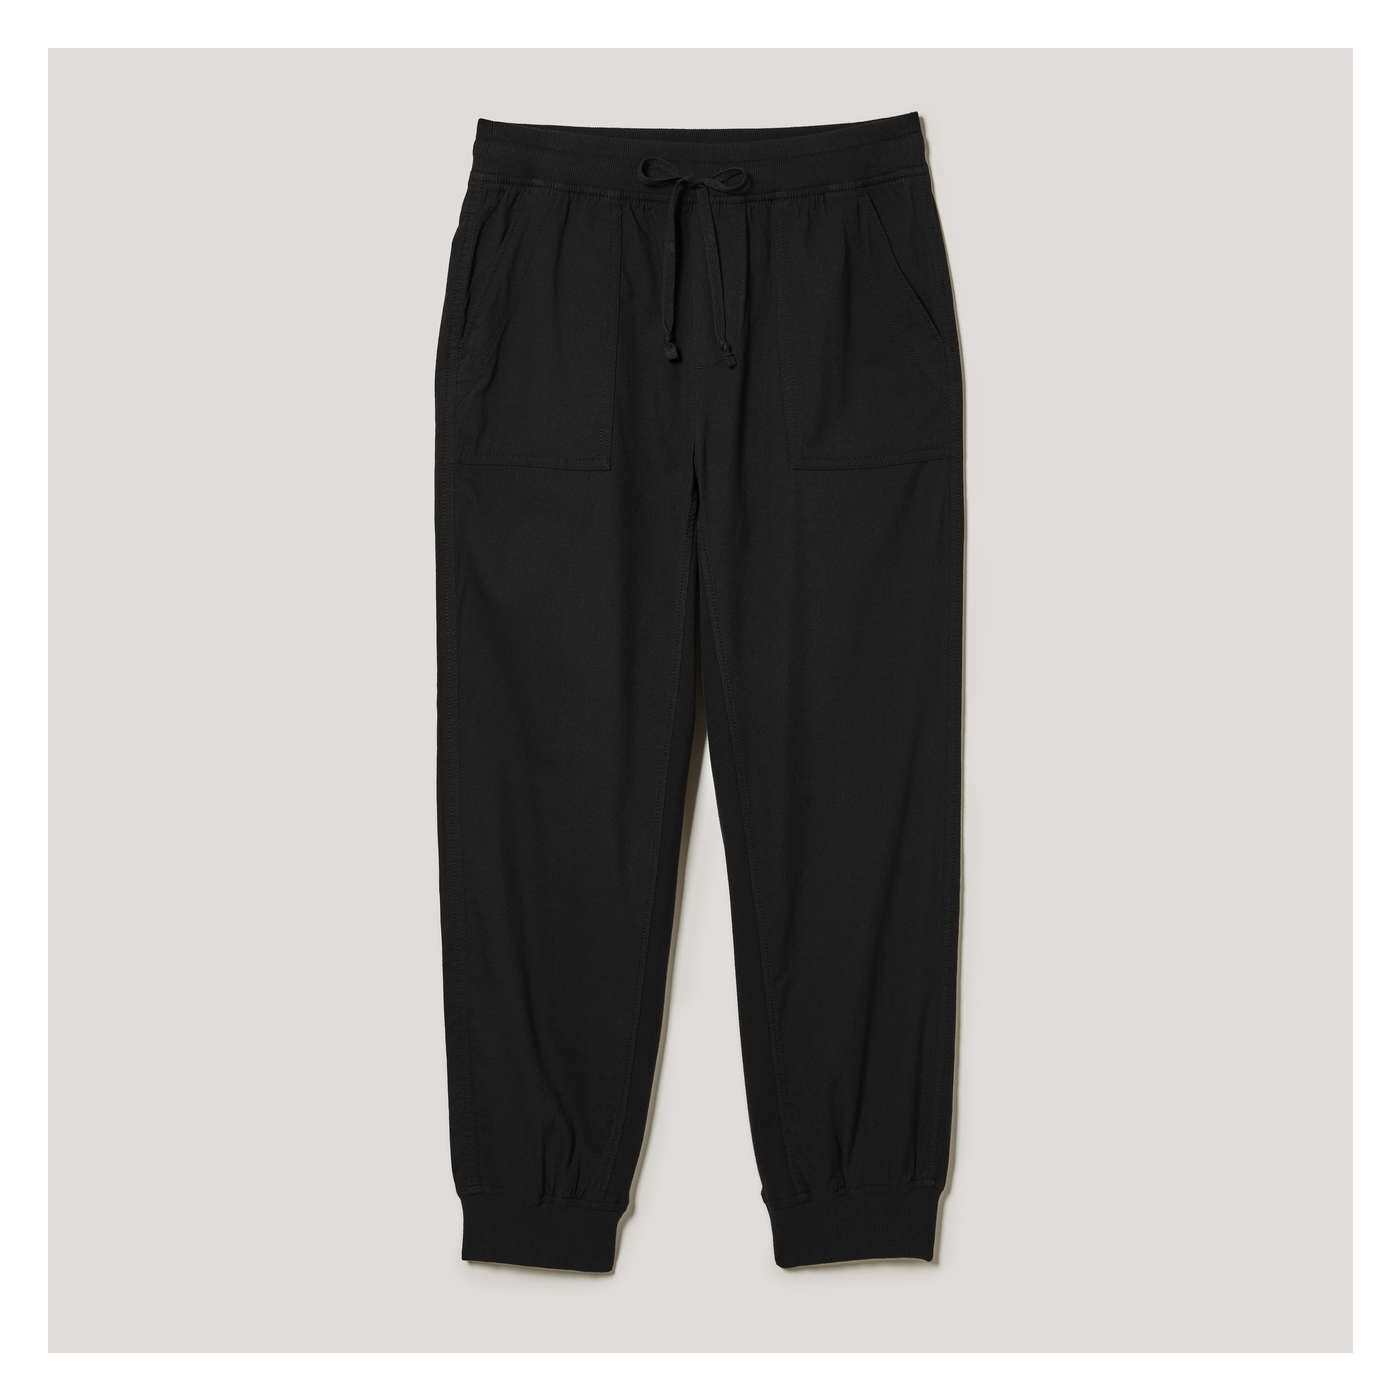 Mid Rise Active Jogger in Black from Joe Fresh